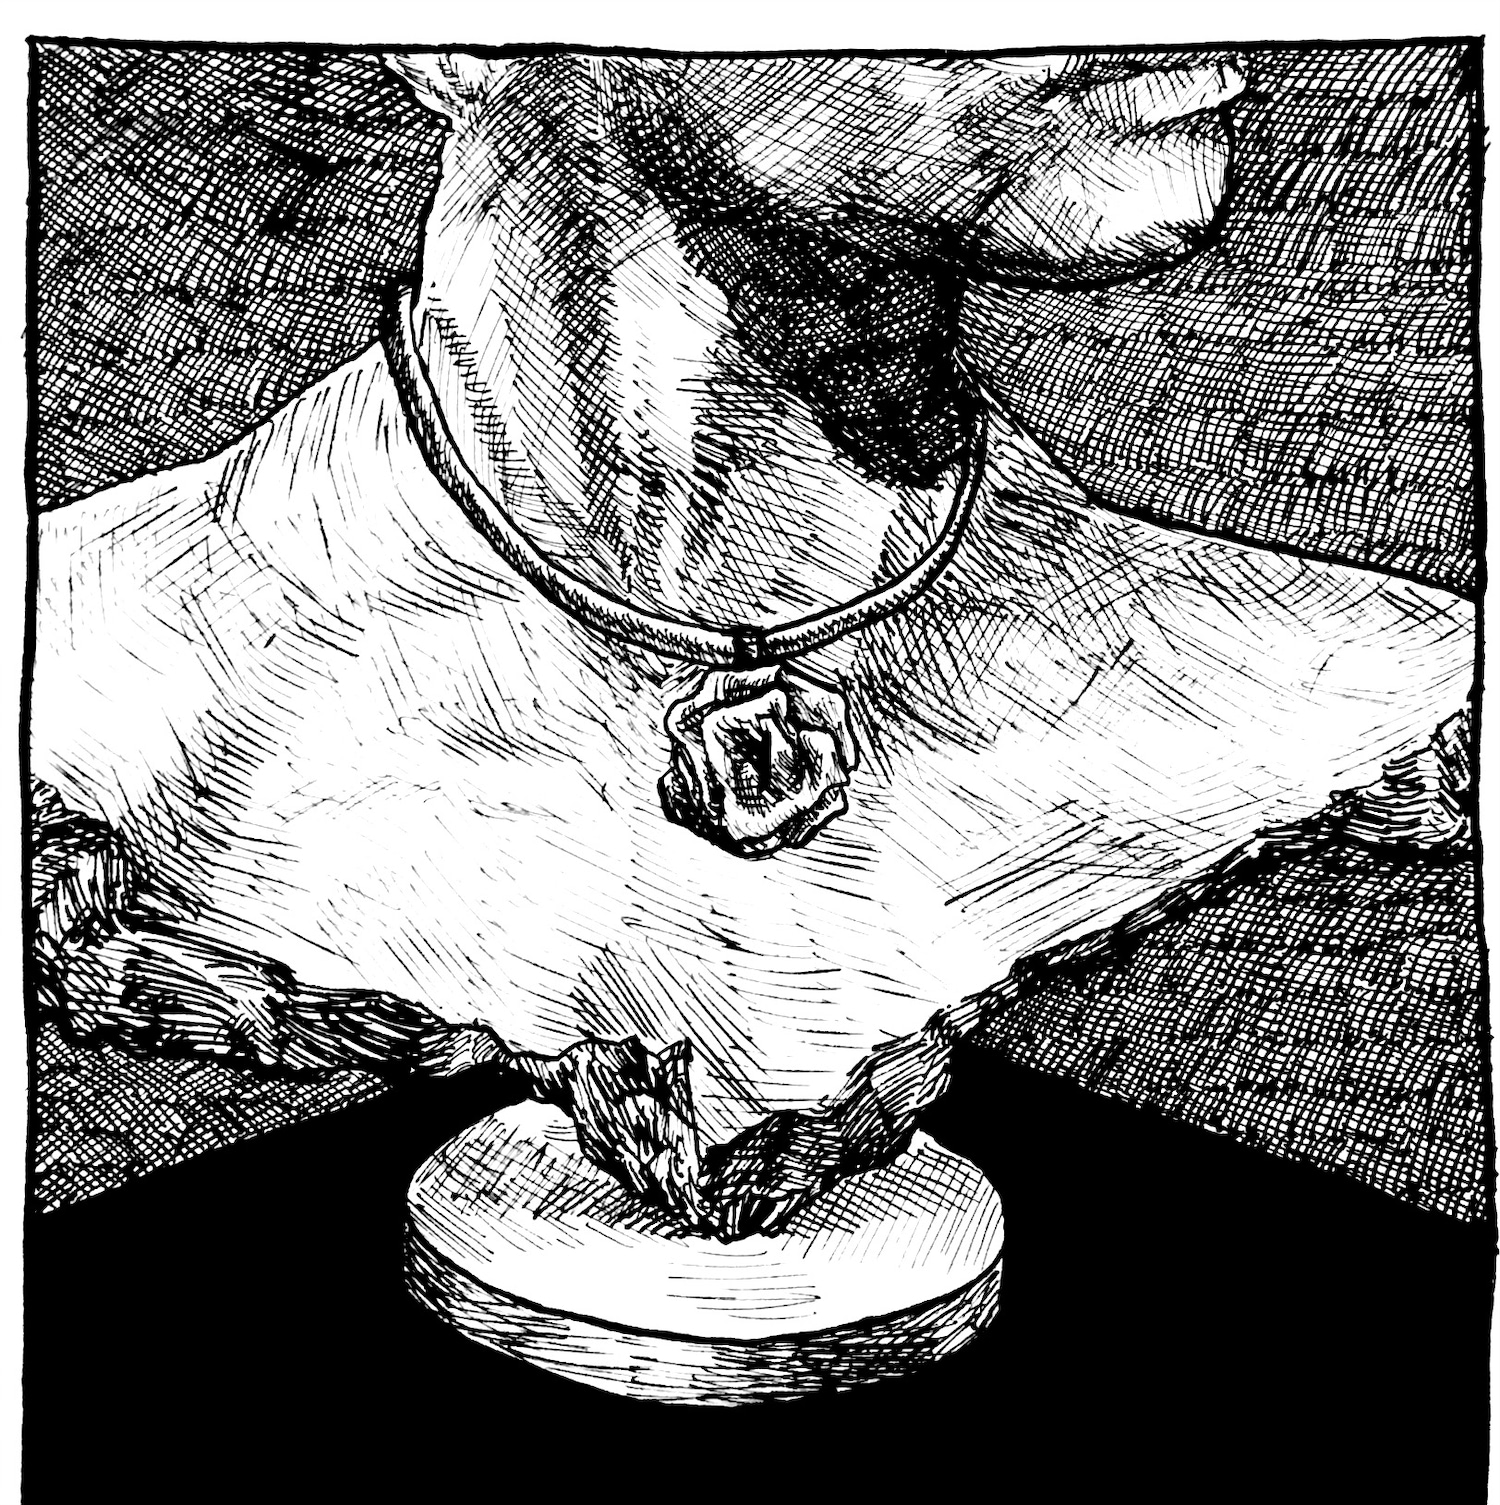 A square pen-and-ink crosshatching illustration of stone bust viewed from the lips down. The bust is wearing a cord necklace with a flower pendant.